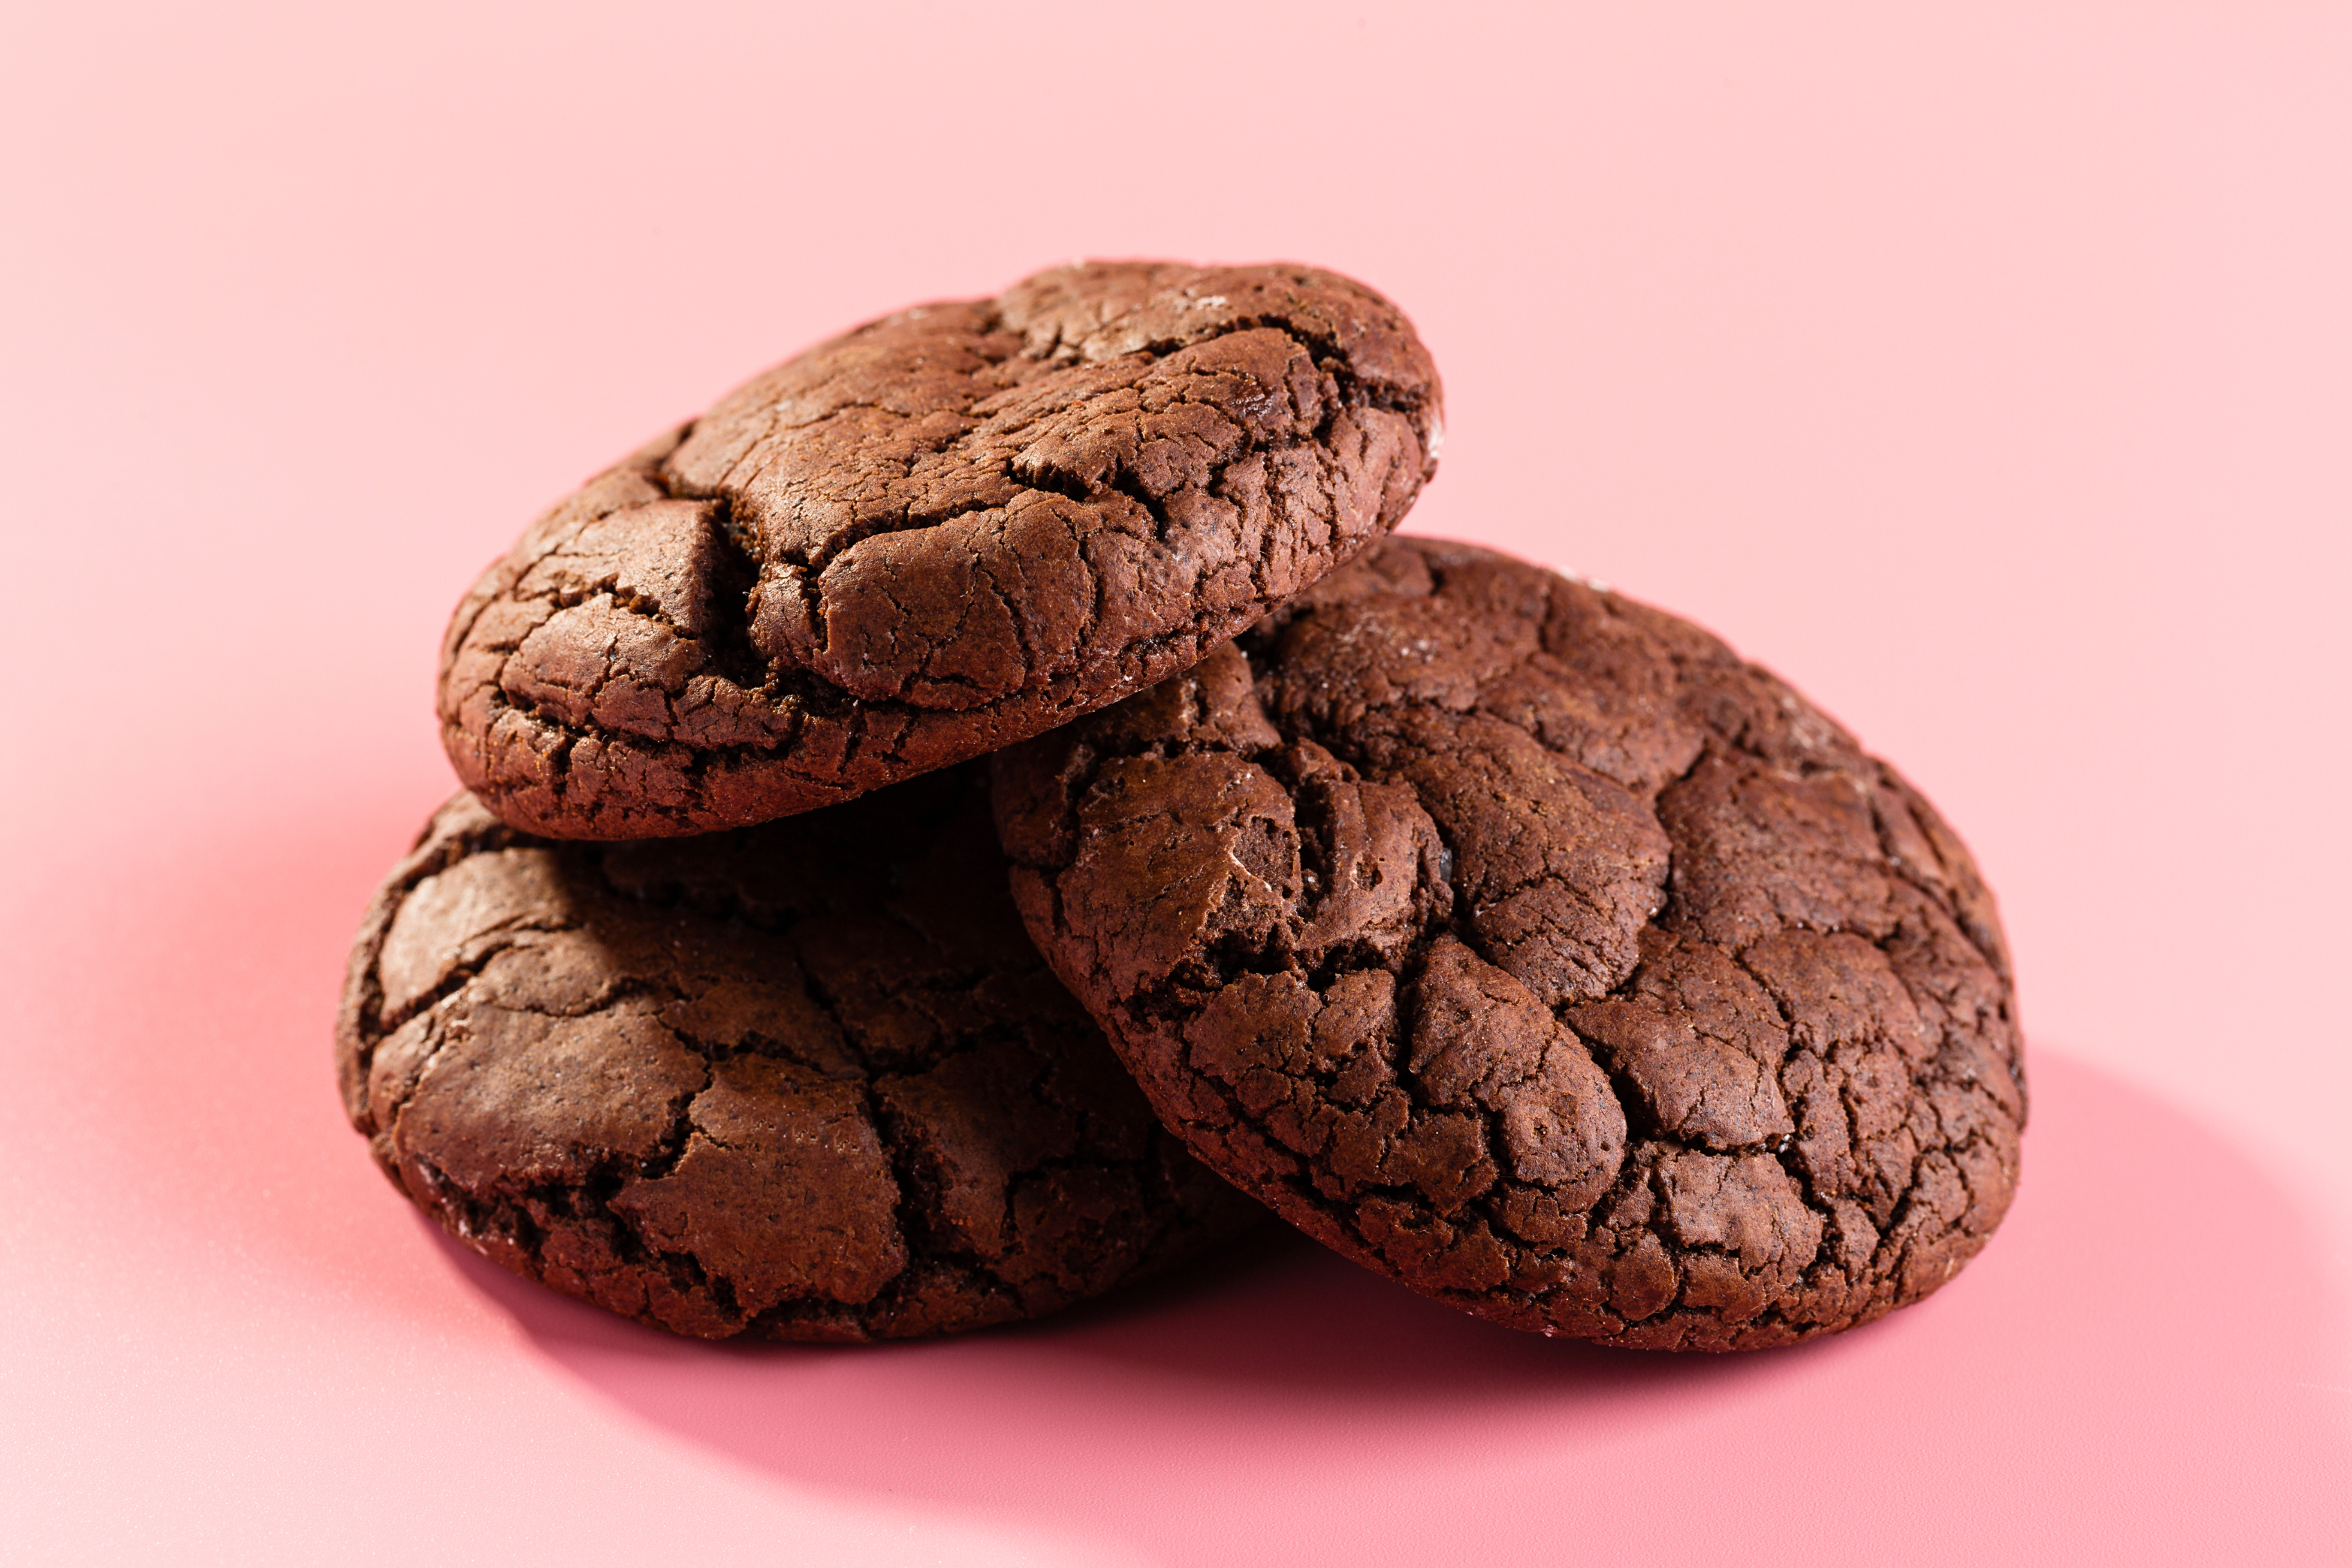 Three chocolate cookies stacked on a plain surface